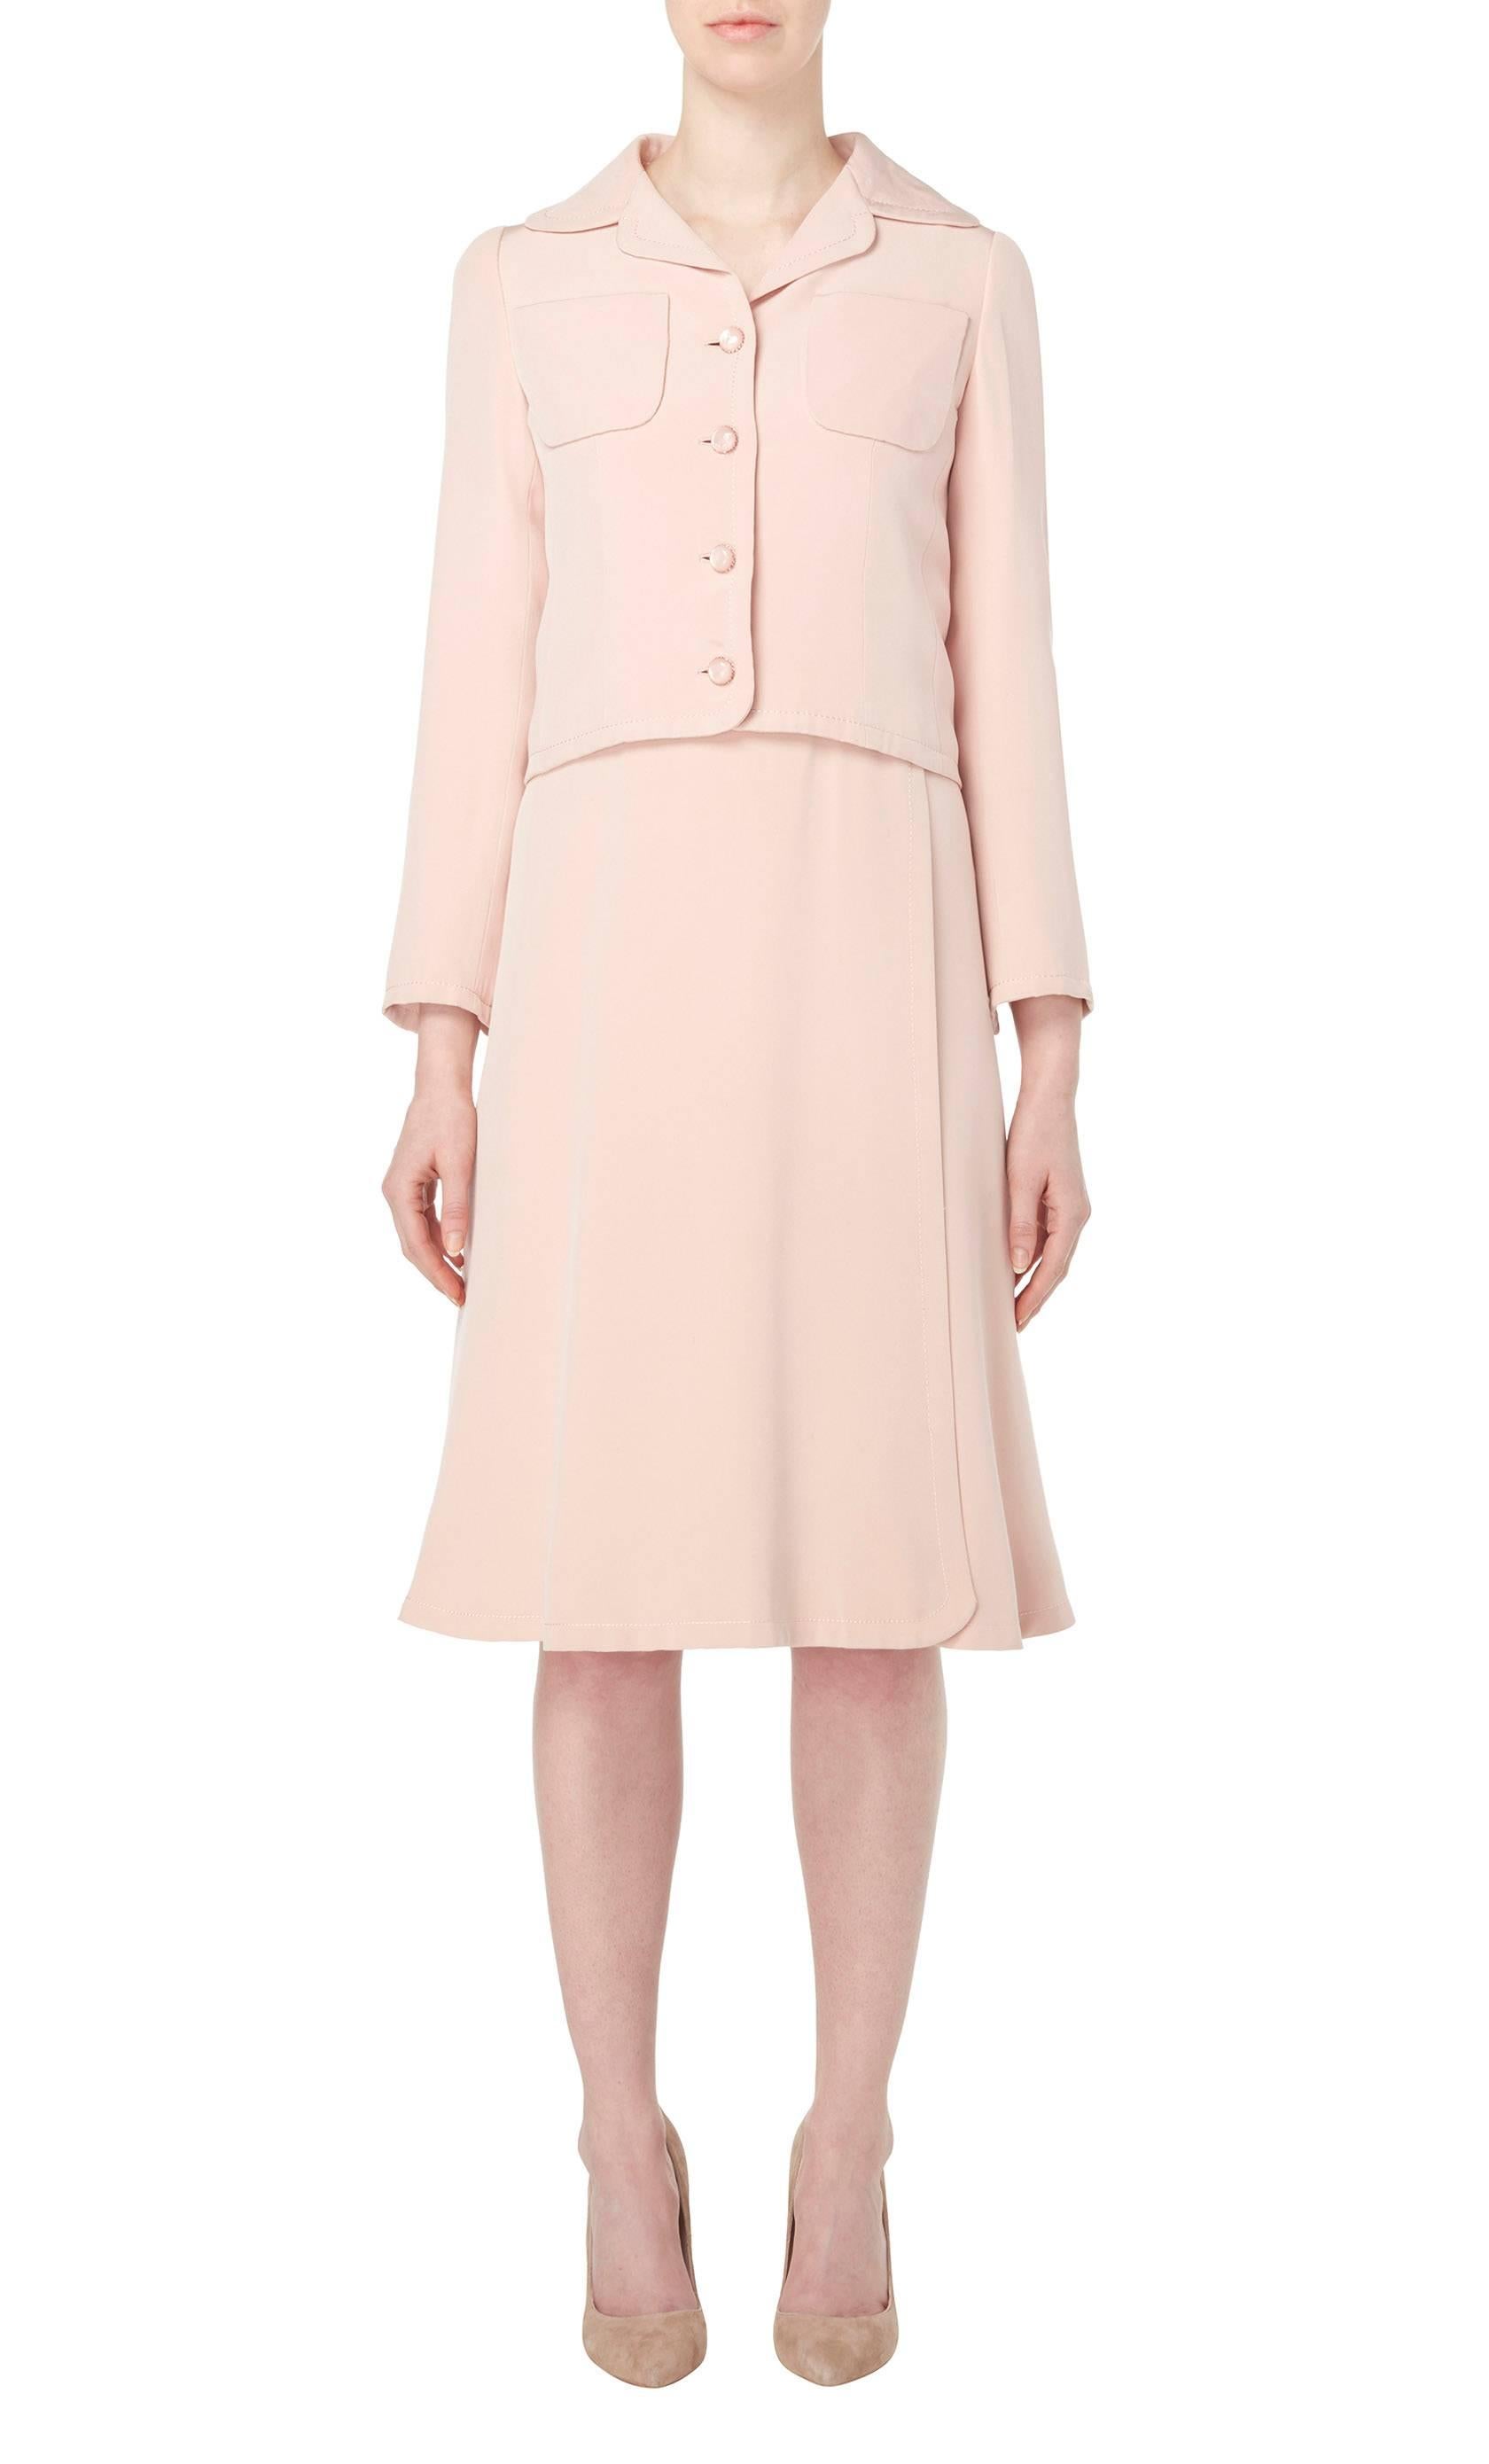 
A gorgeous piece of haute couture, this Guy Laroche dress suit constructed in pale pink silk, is perfect for daytime events. The sleeveless dress has an extremely flattering cut, skimming the body and flaring into a softly pleated skirt. The belt